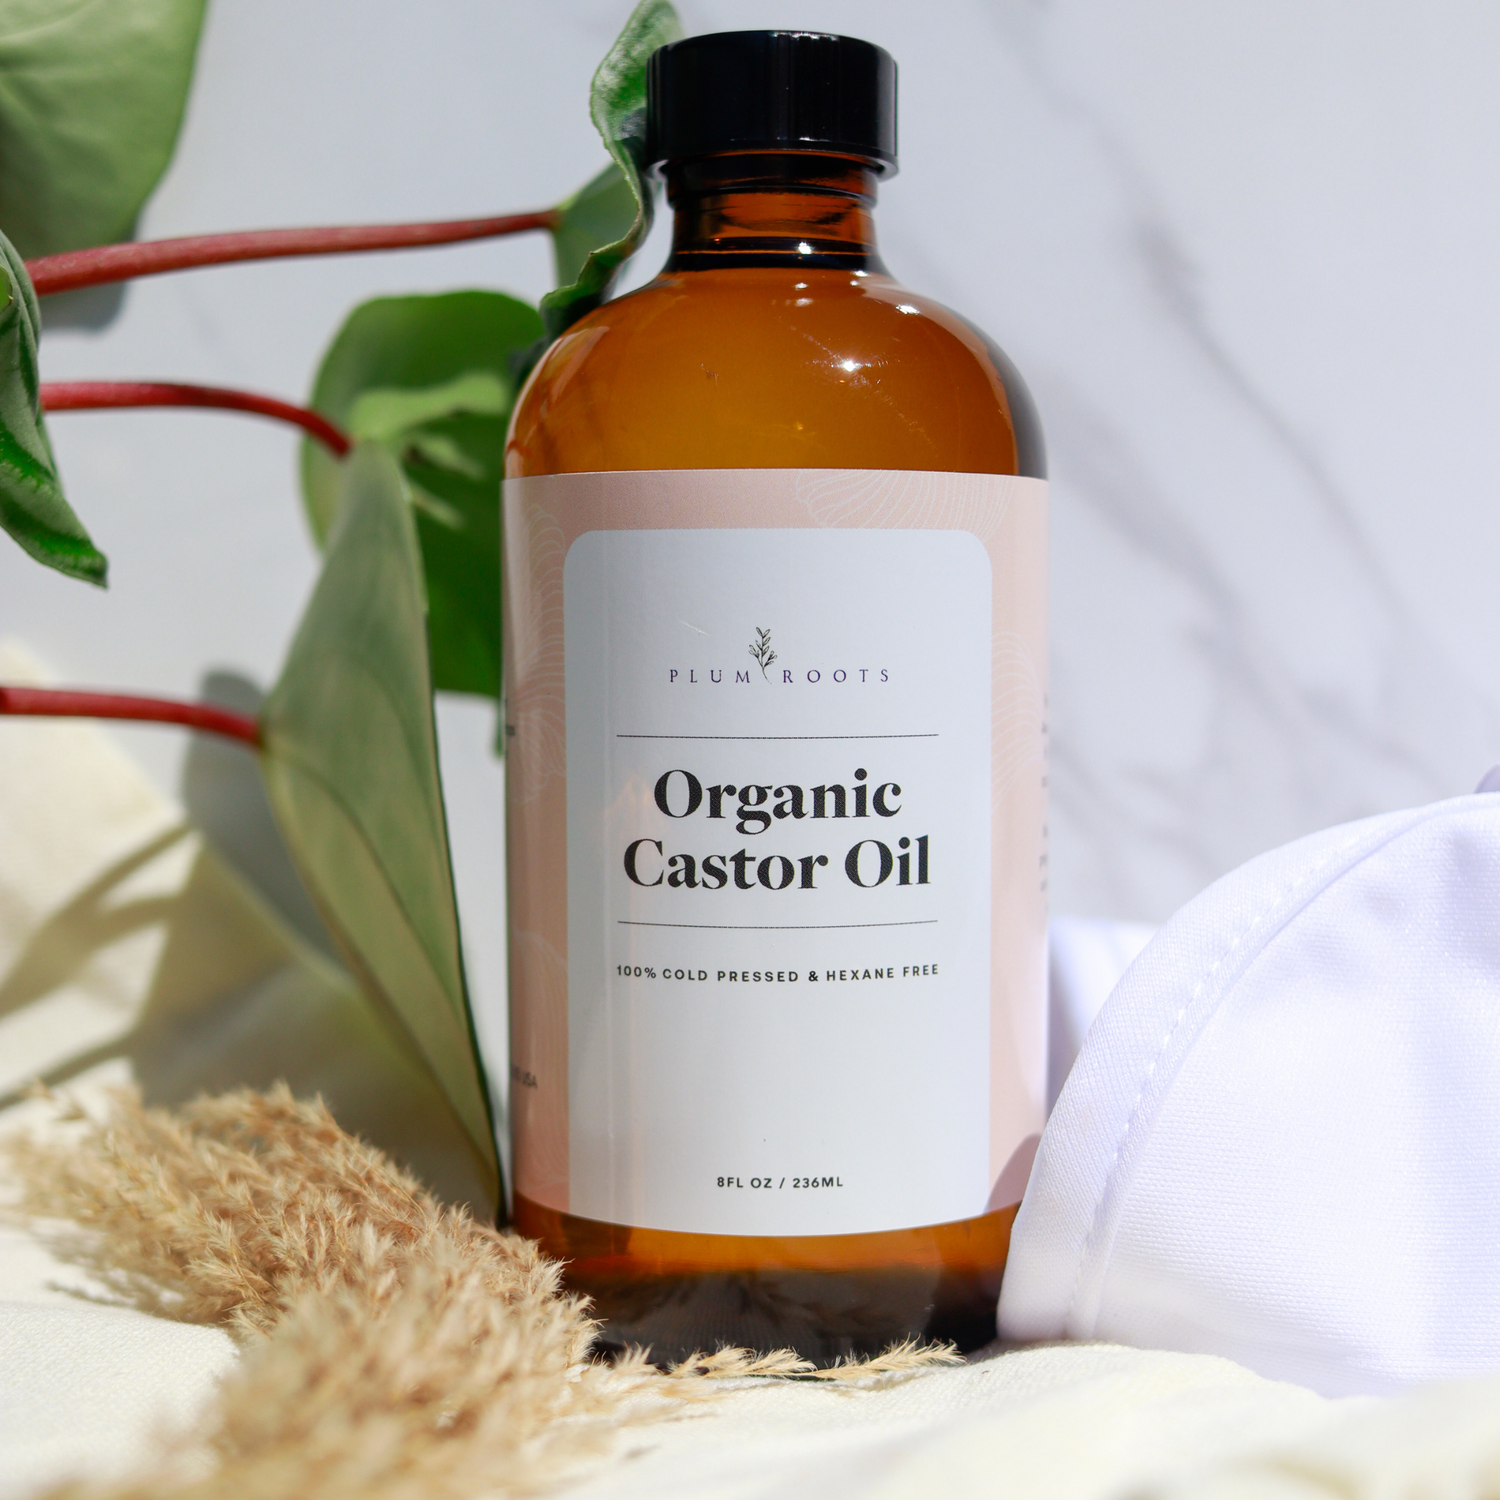 Organic Castor Oil, Cold Pressed, Hexane free in a amber glass bottle.  A perfect addition to a castor oil pack for a gentle liver detox.  Also great for hair growth, anti-inflammatory, deep sleep, detox and cleanse. 